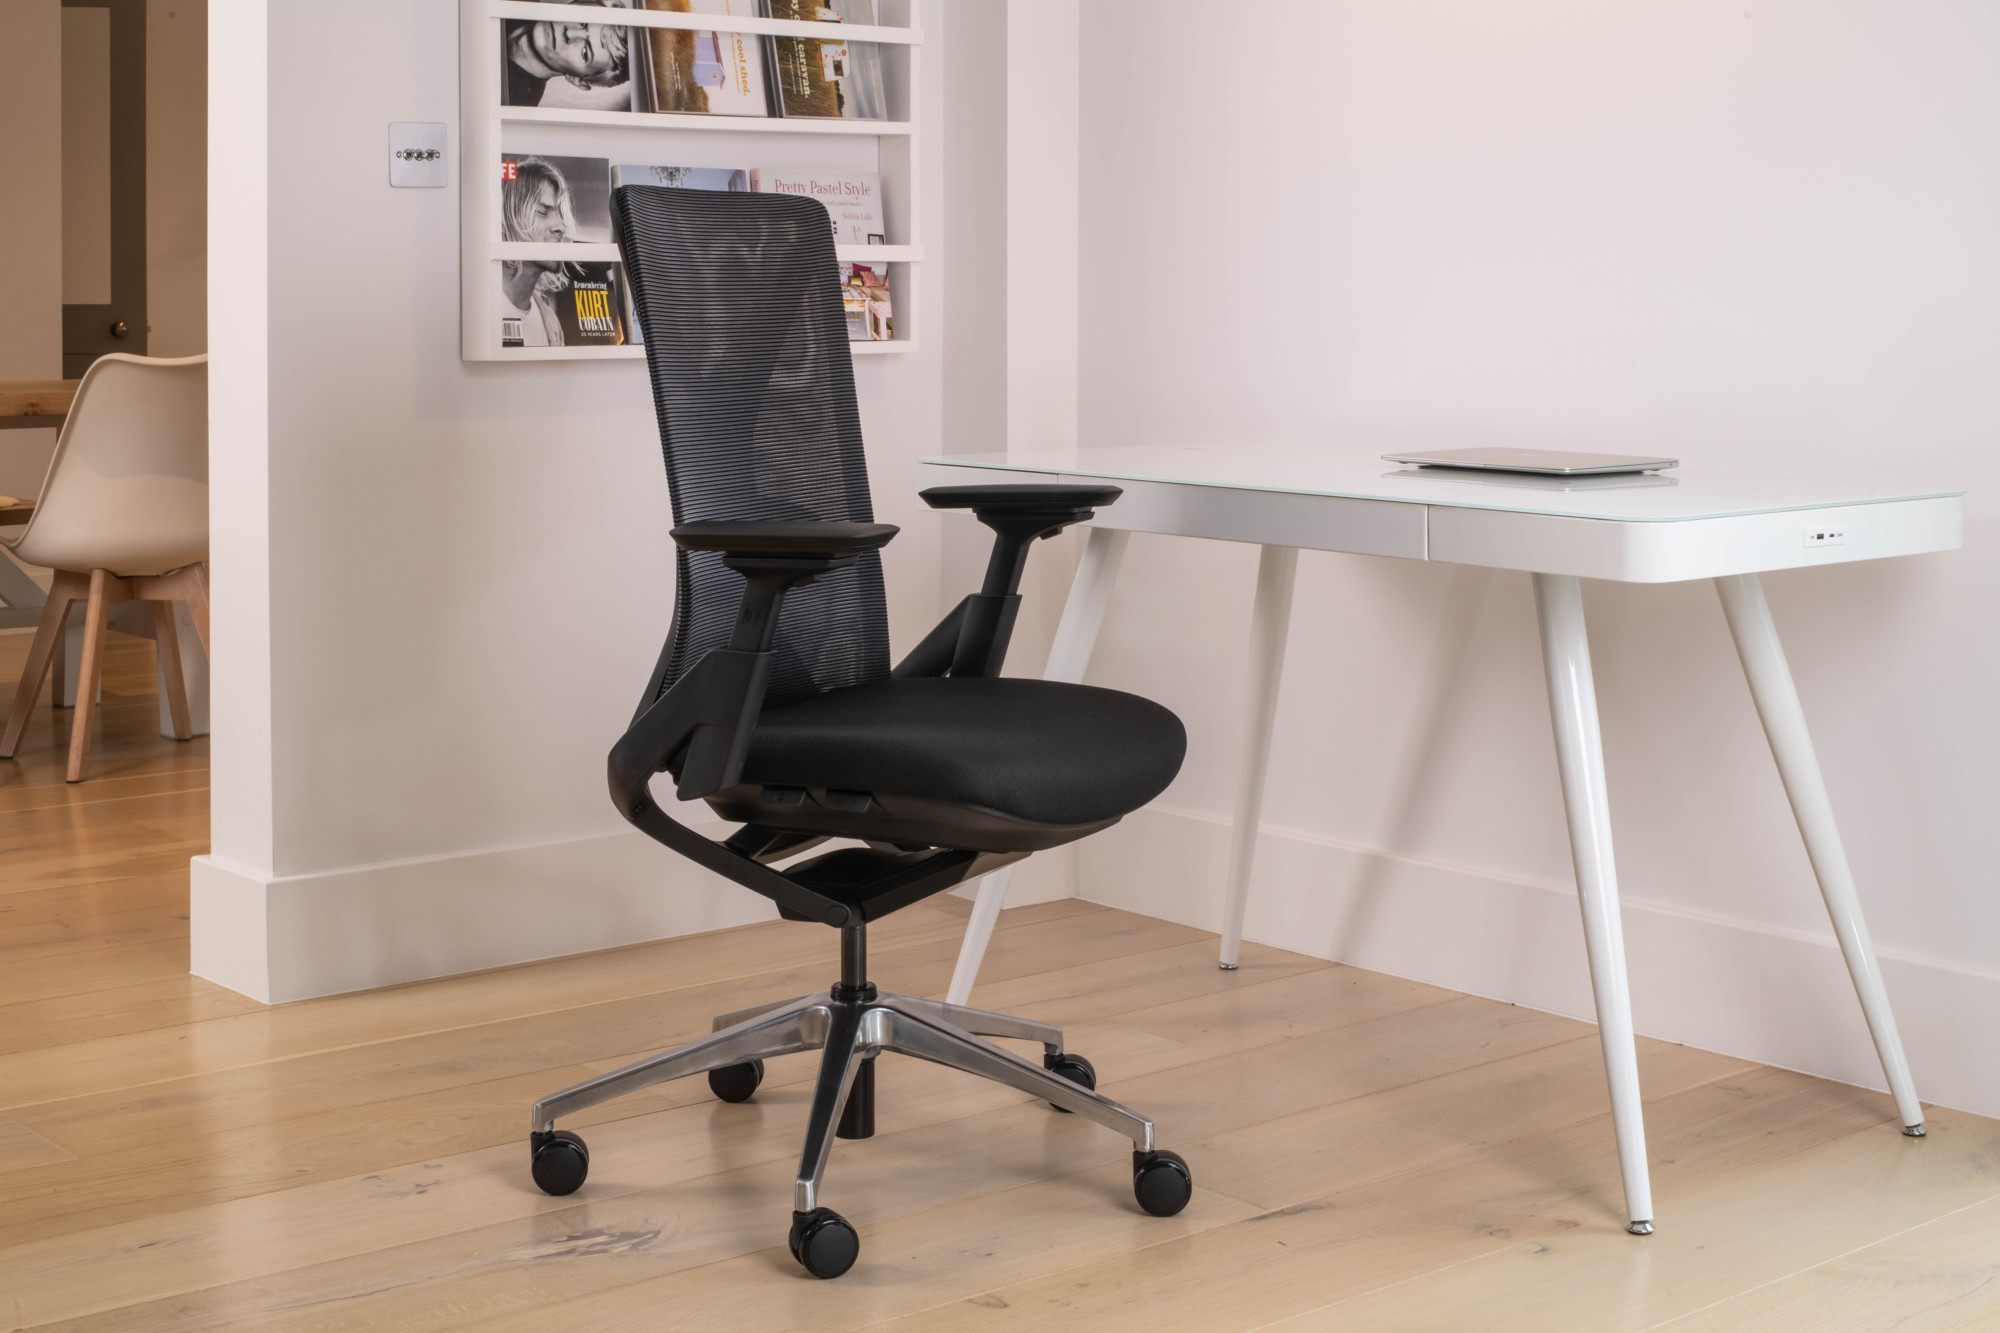 An urban fully ergonomic black home office chair with a wishbone back detail.